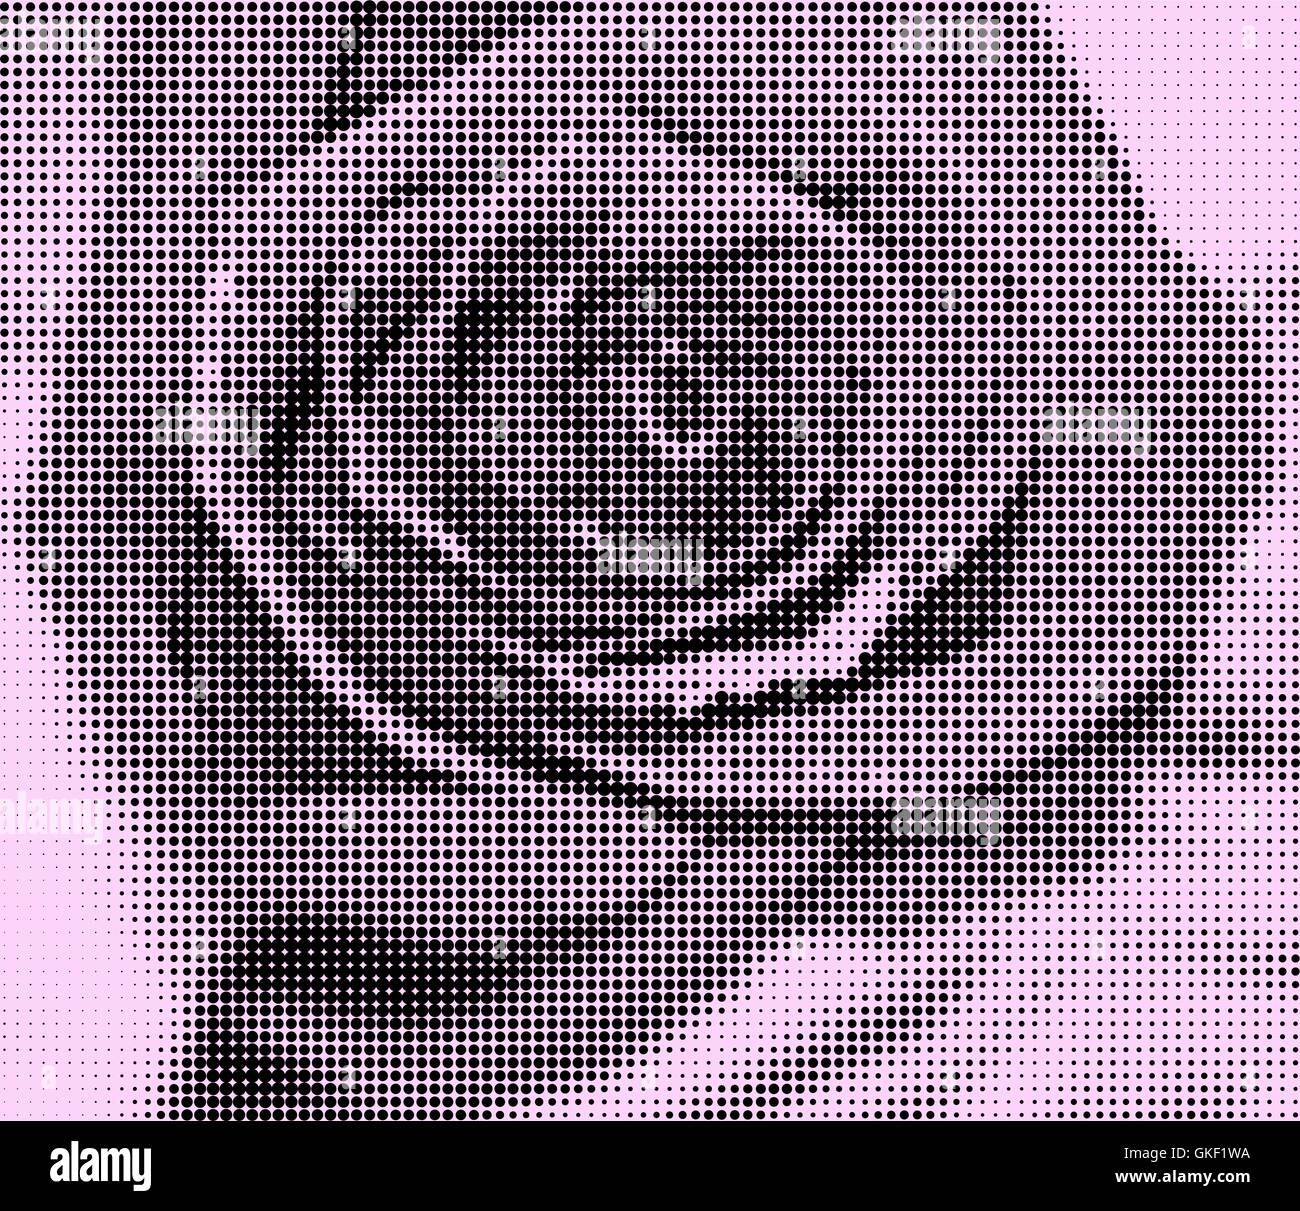 Vector background roses created with black circles and halftones Stock Vector